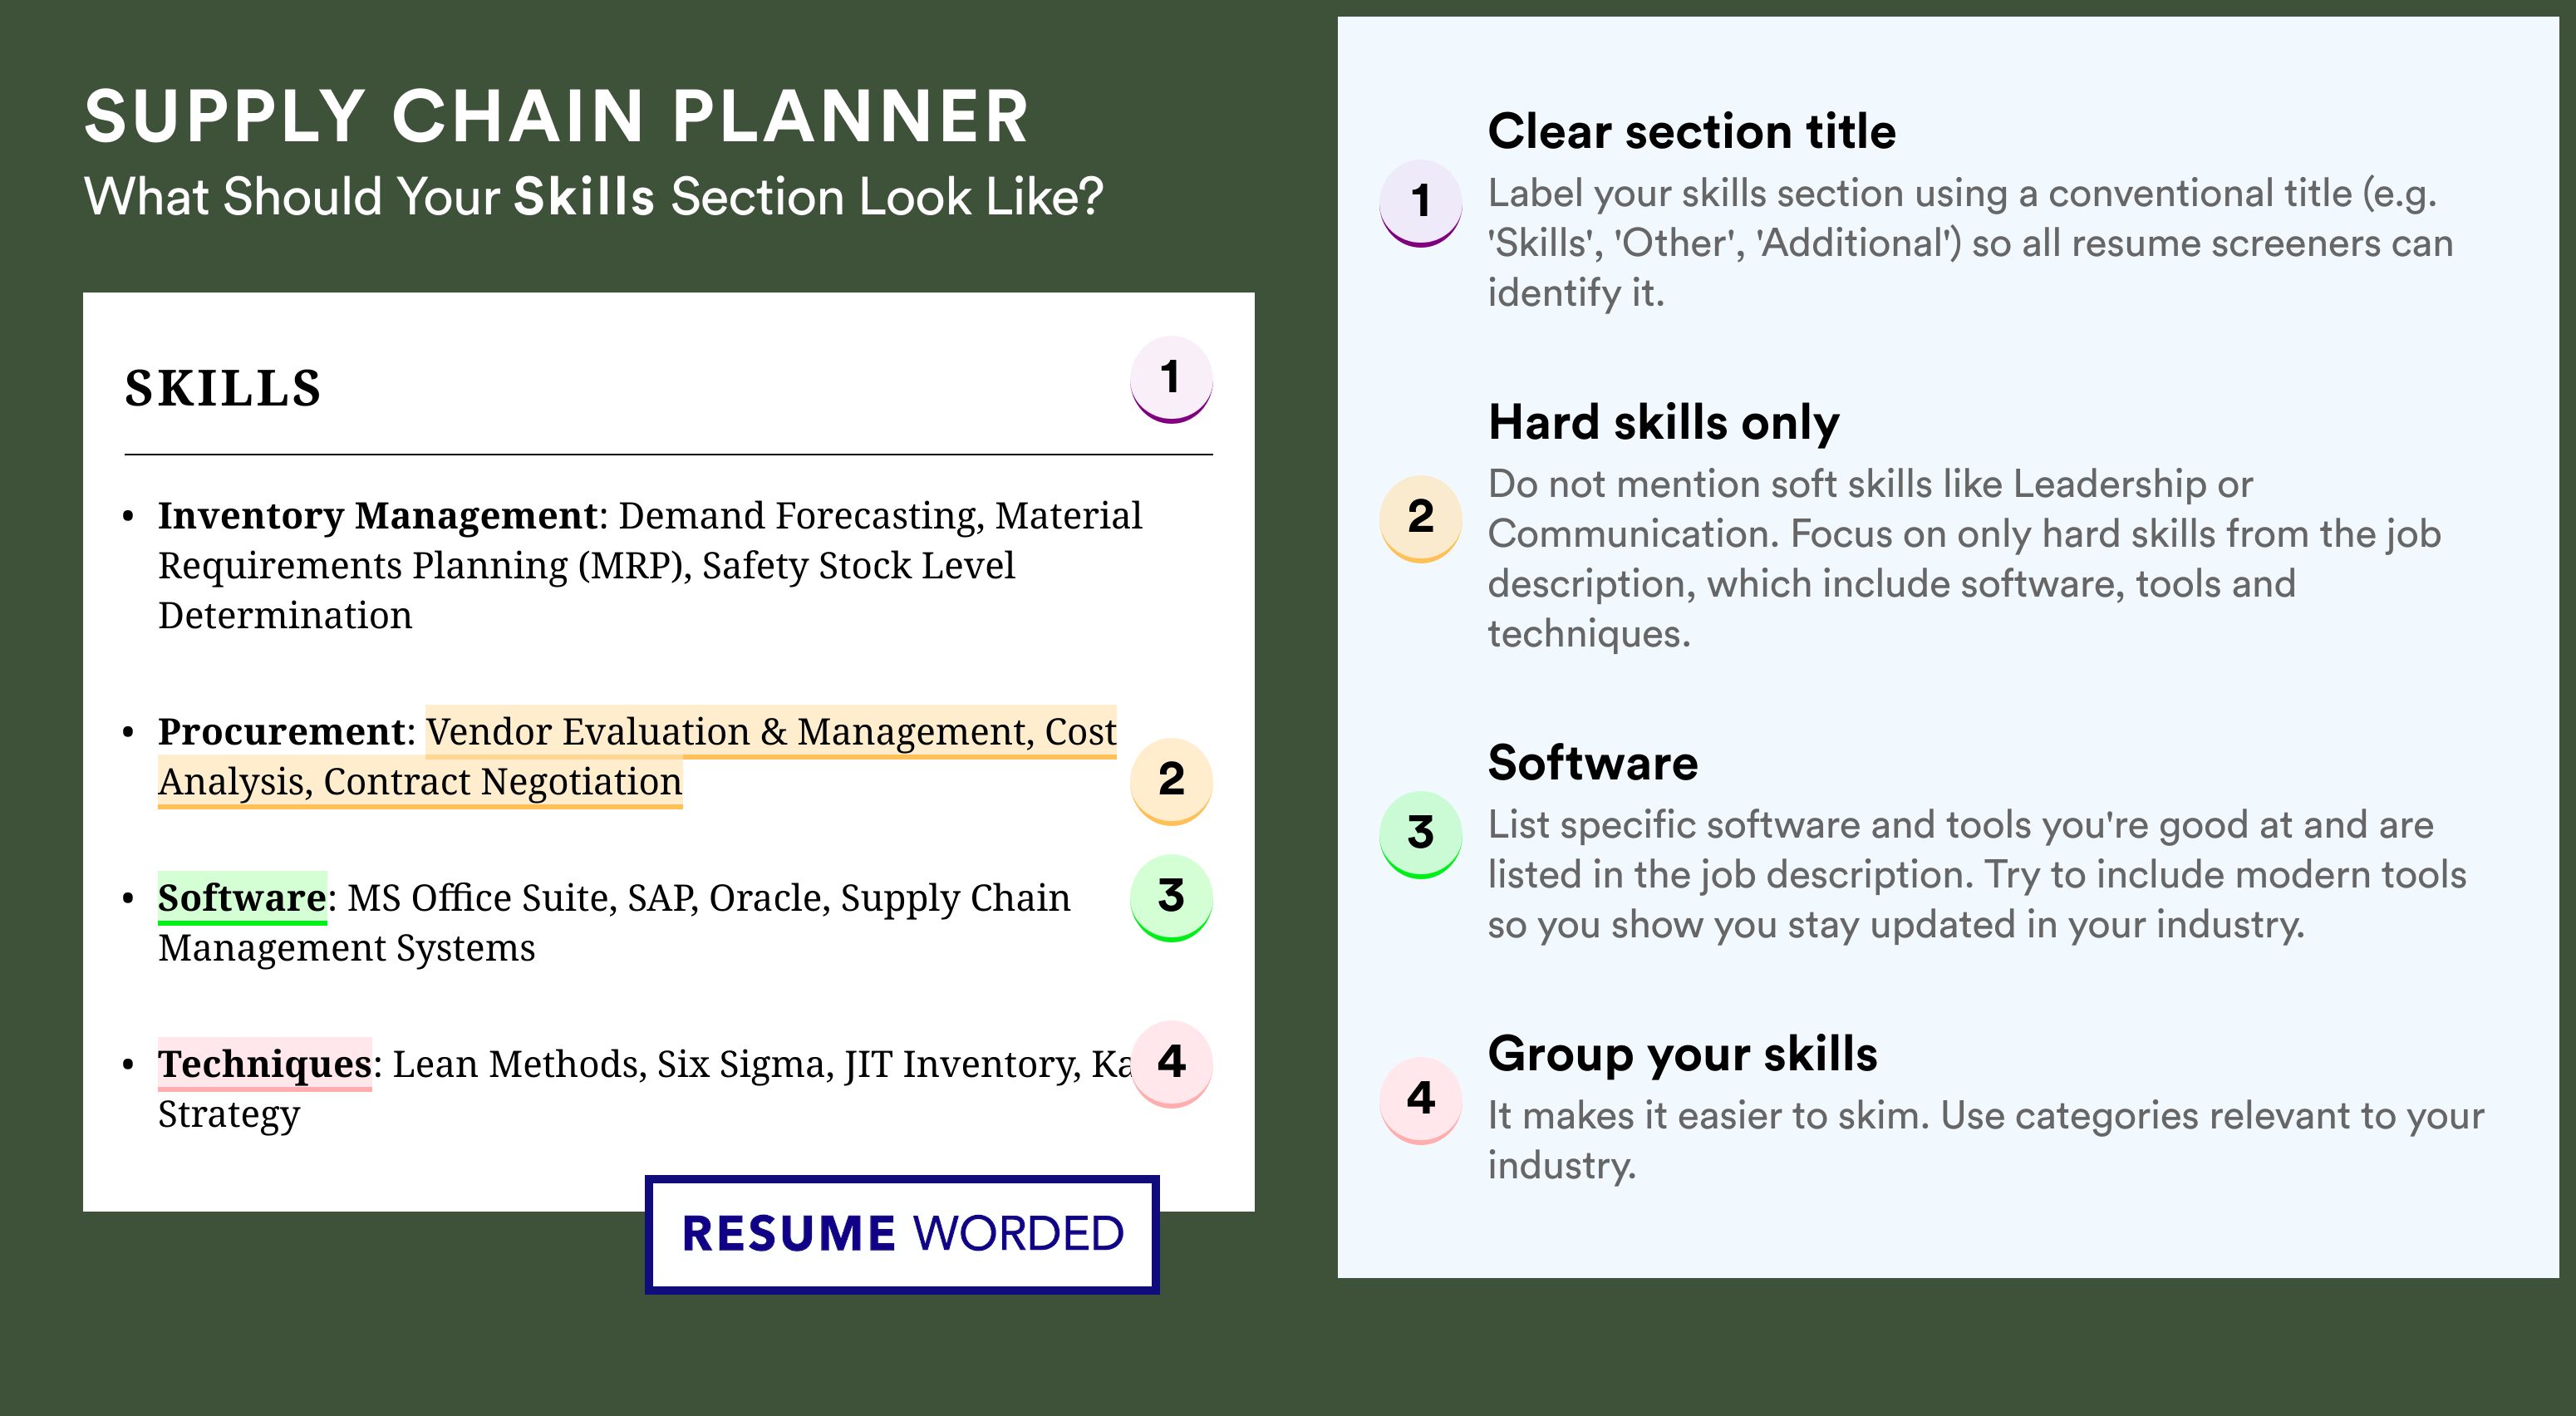 How To Write Your Skills Section - Supply Chain Planner Roles